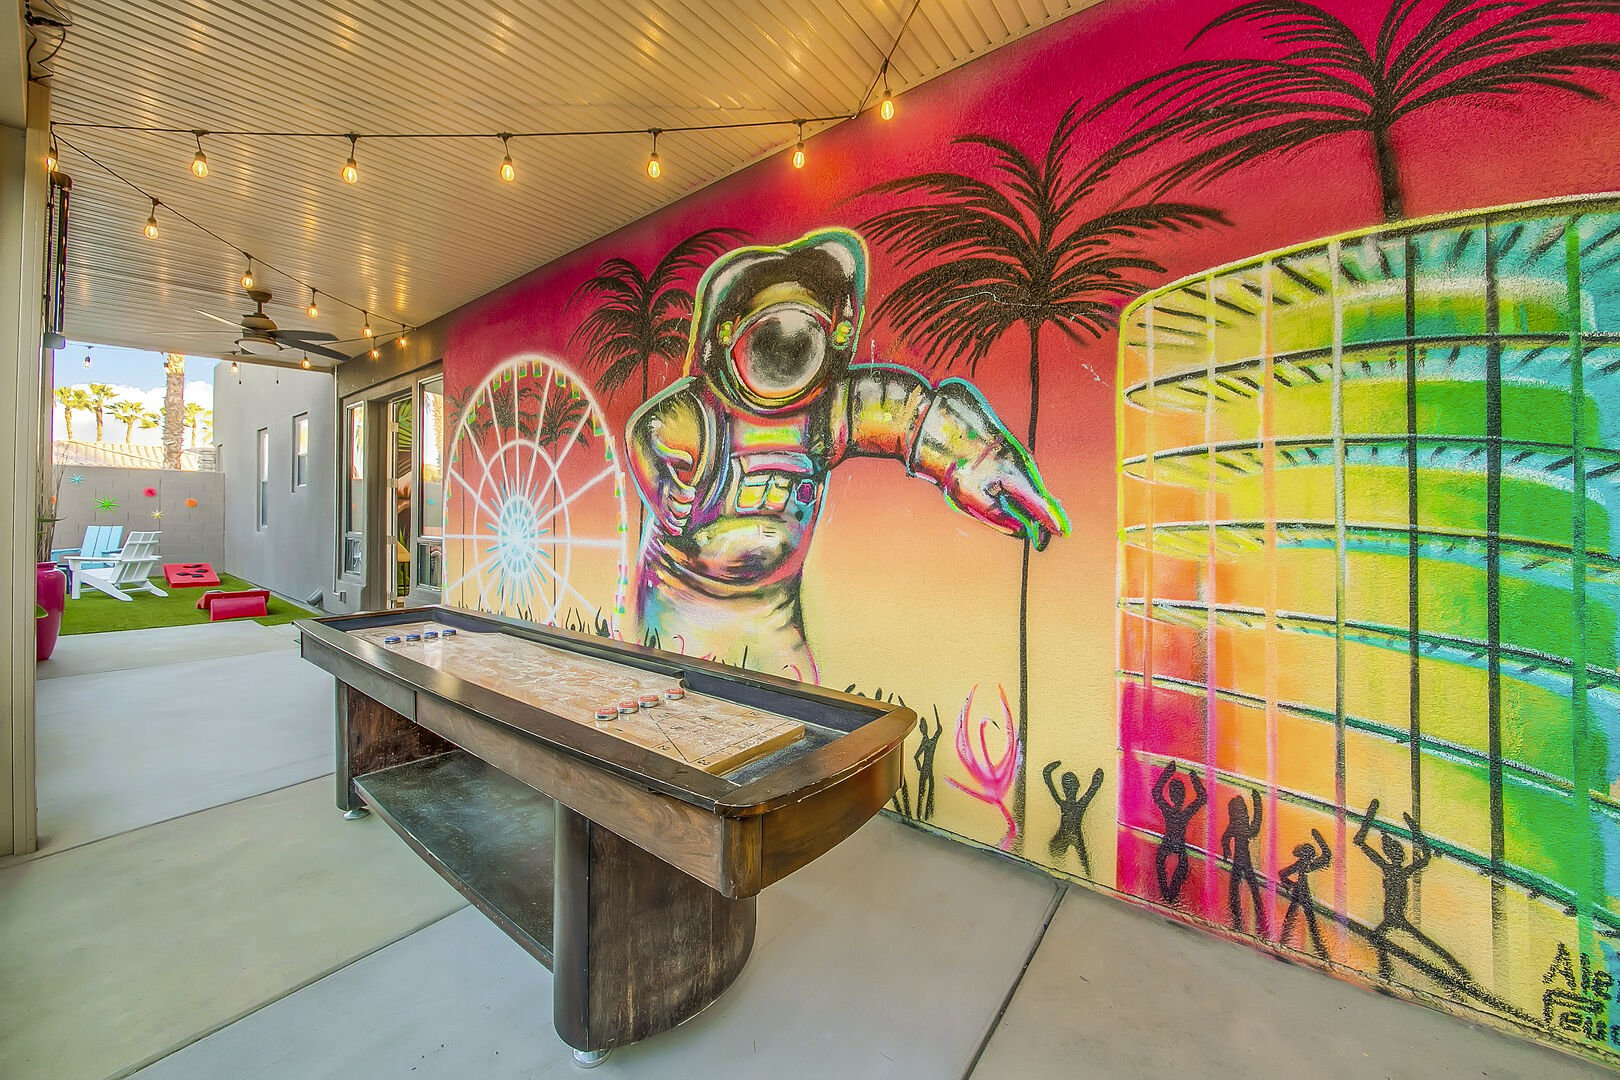 Enjoy playing on the shuffleboard table with your loved one and don't get to distracted with the beautiful view of the mural!